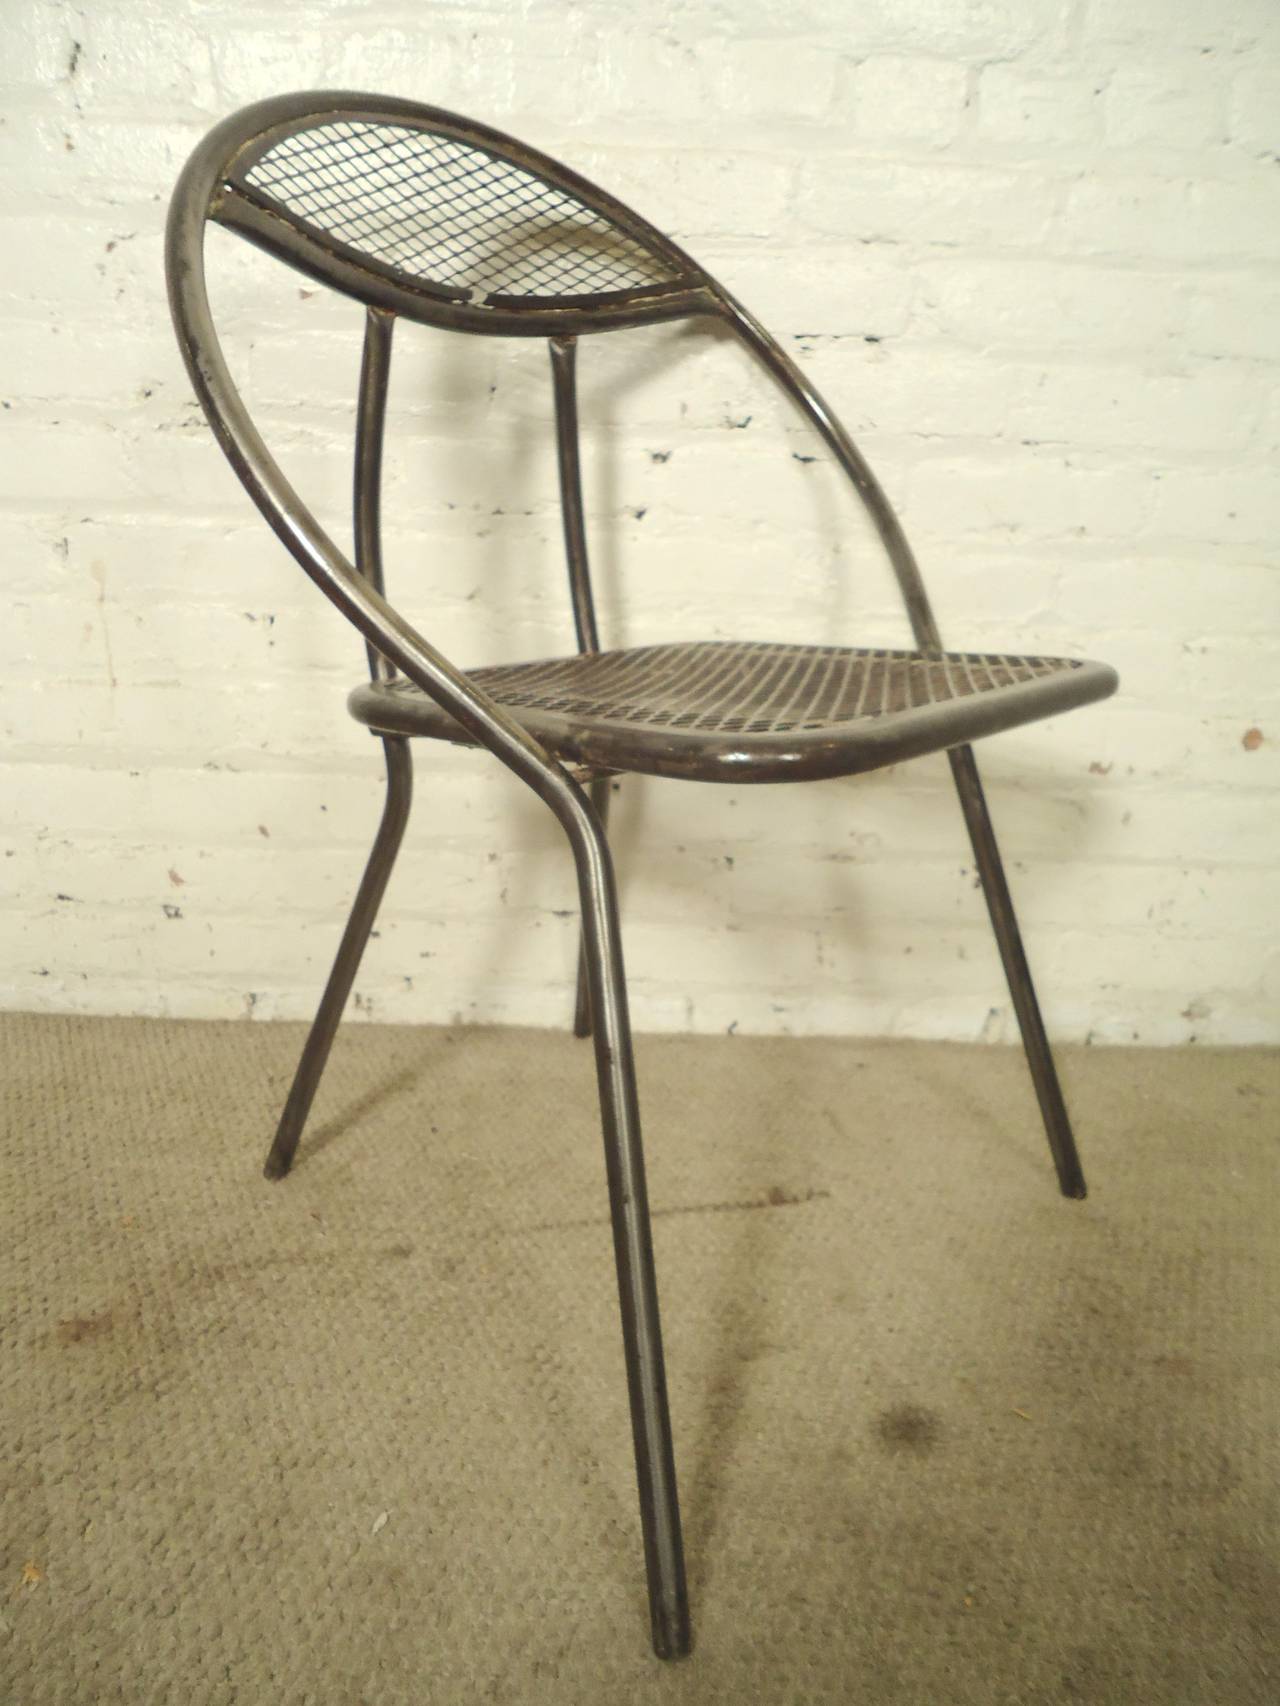 Vintage modern round back chairs refinished in an industrial style finish. Clam shape backs with mesh seating.

(Please confirm item location - NY or NJ - with dealer)